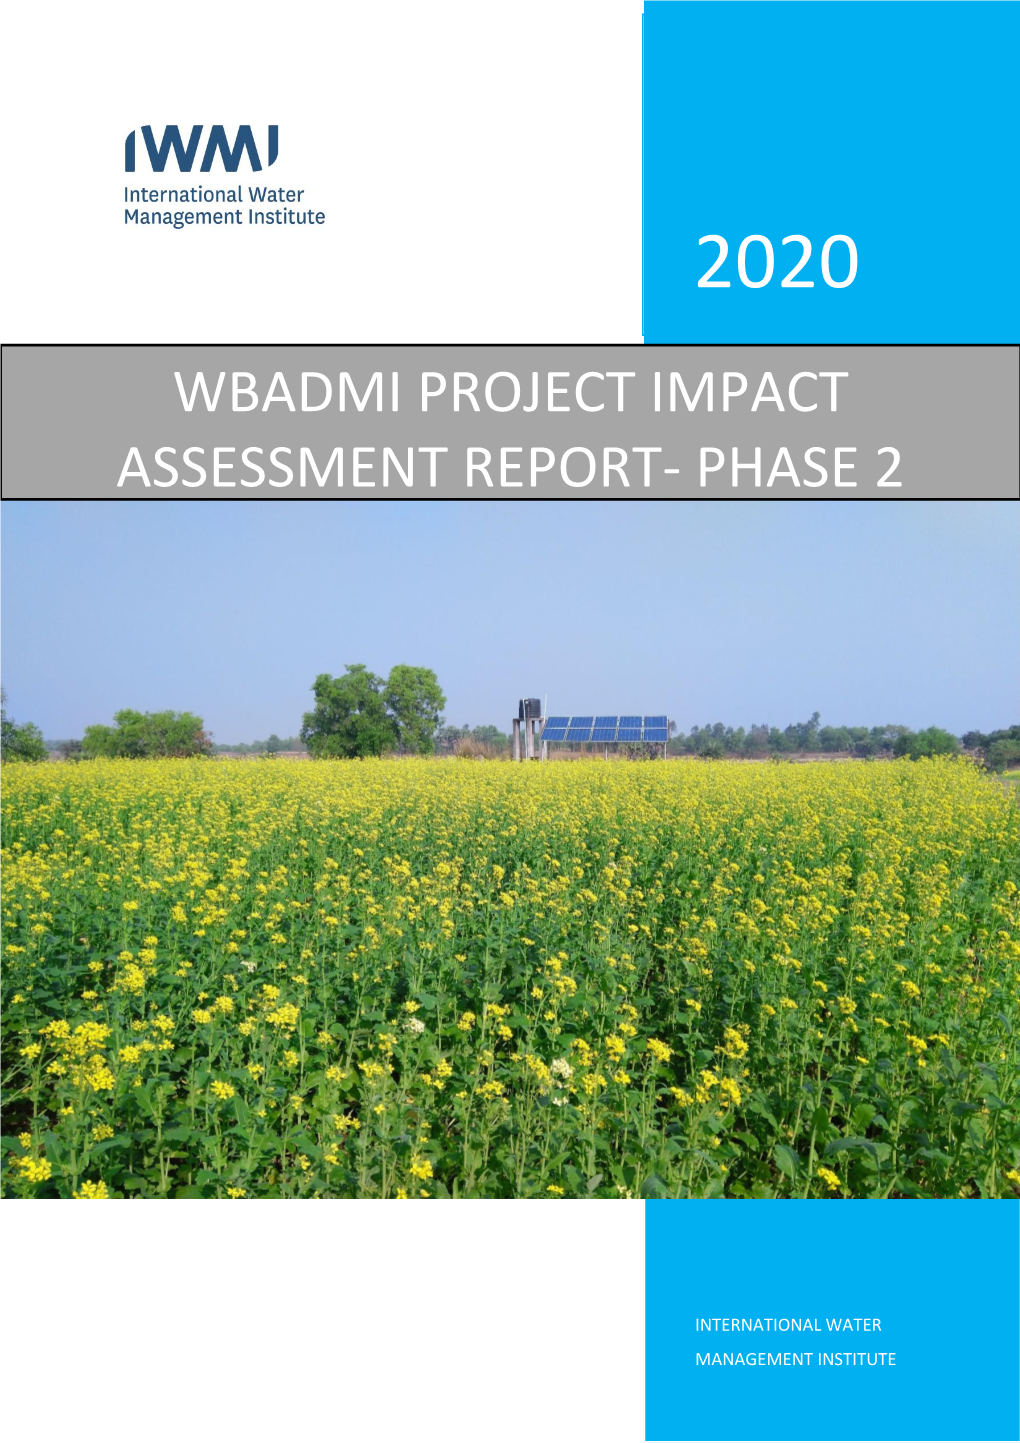 Wbadmi Project Impact Assessment Report- Phase 2